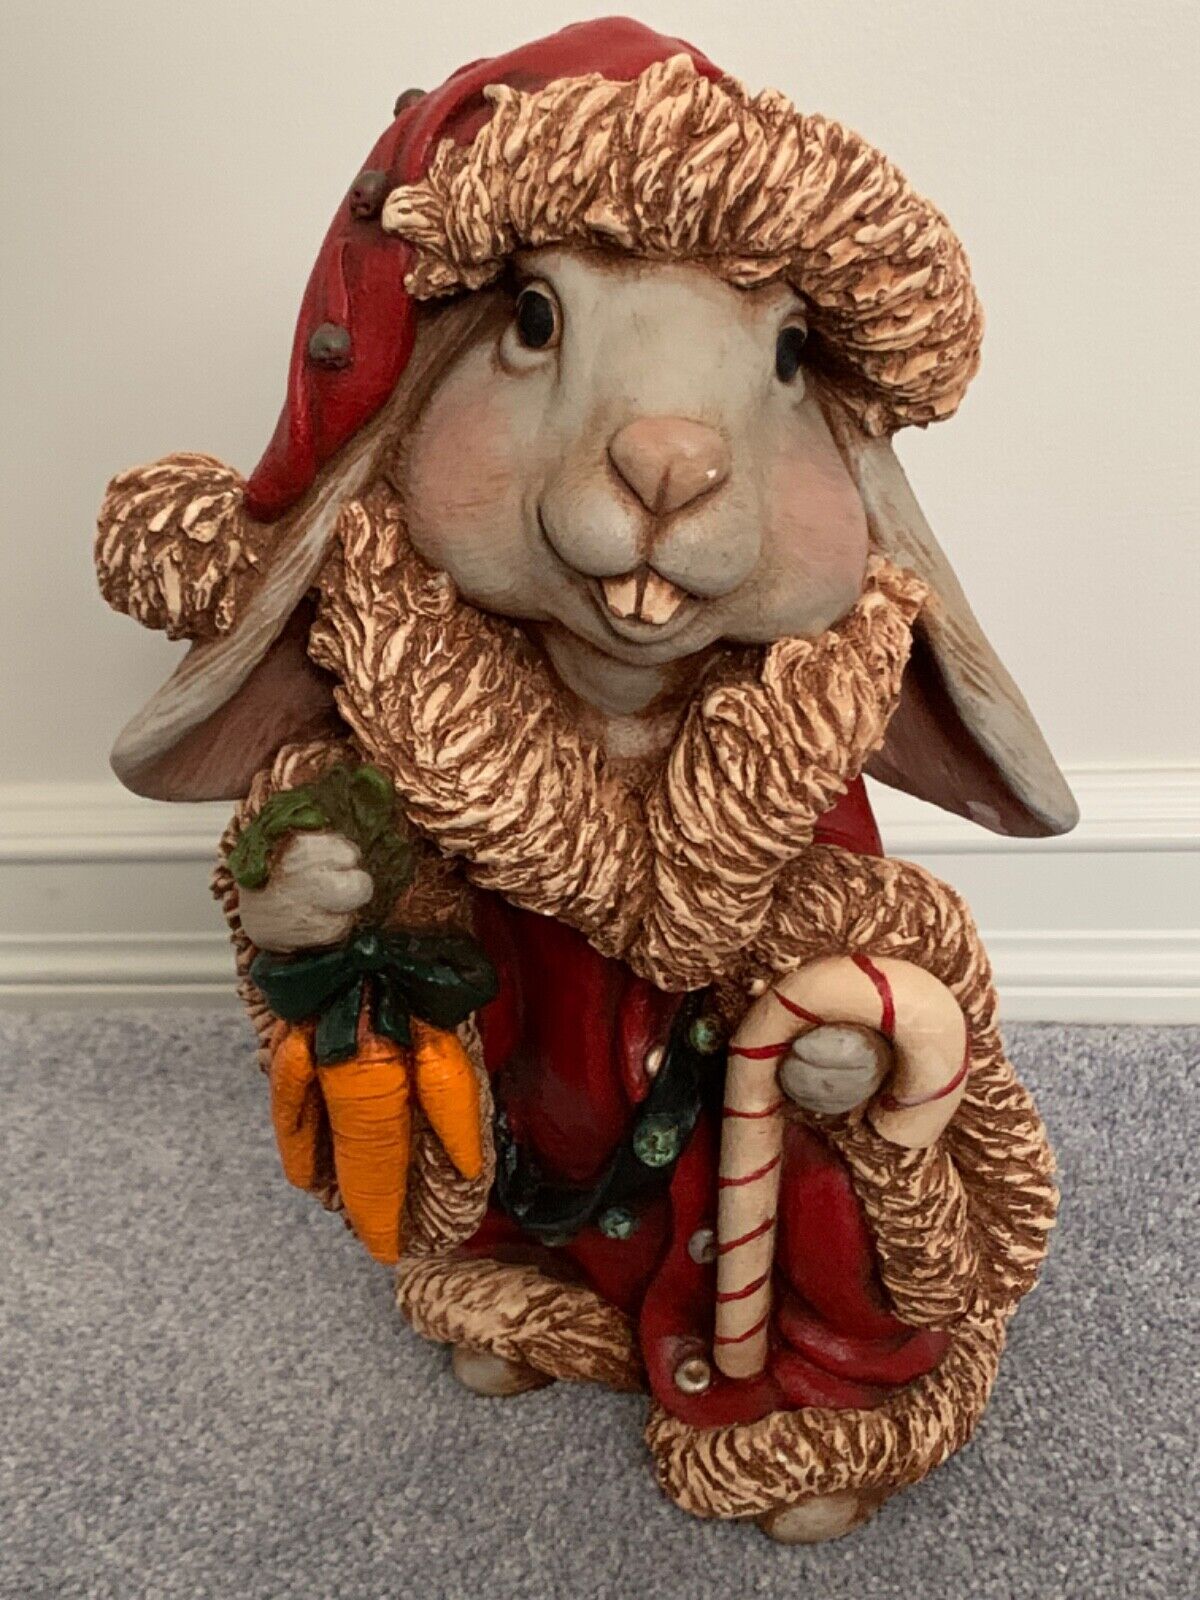 Festive Easter Bunny Rabbit Figurine Statue Dressed in a Christmas Outfit 13